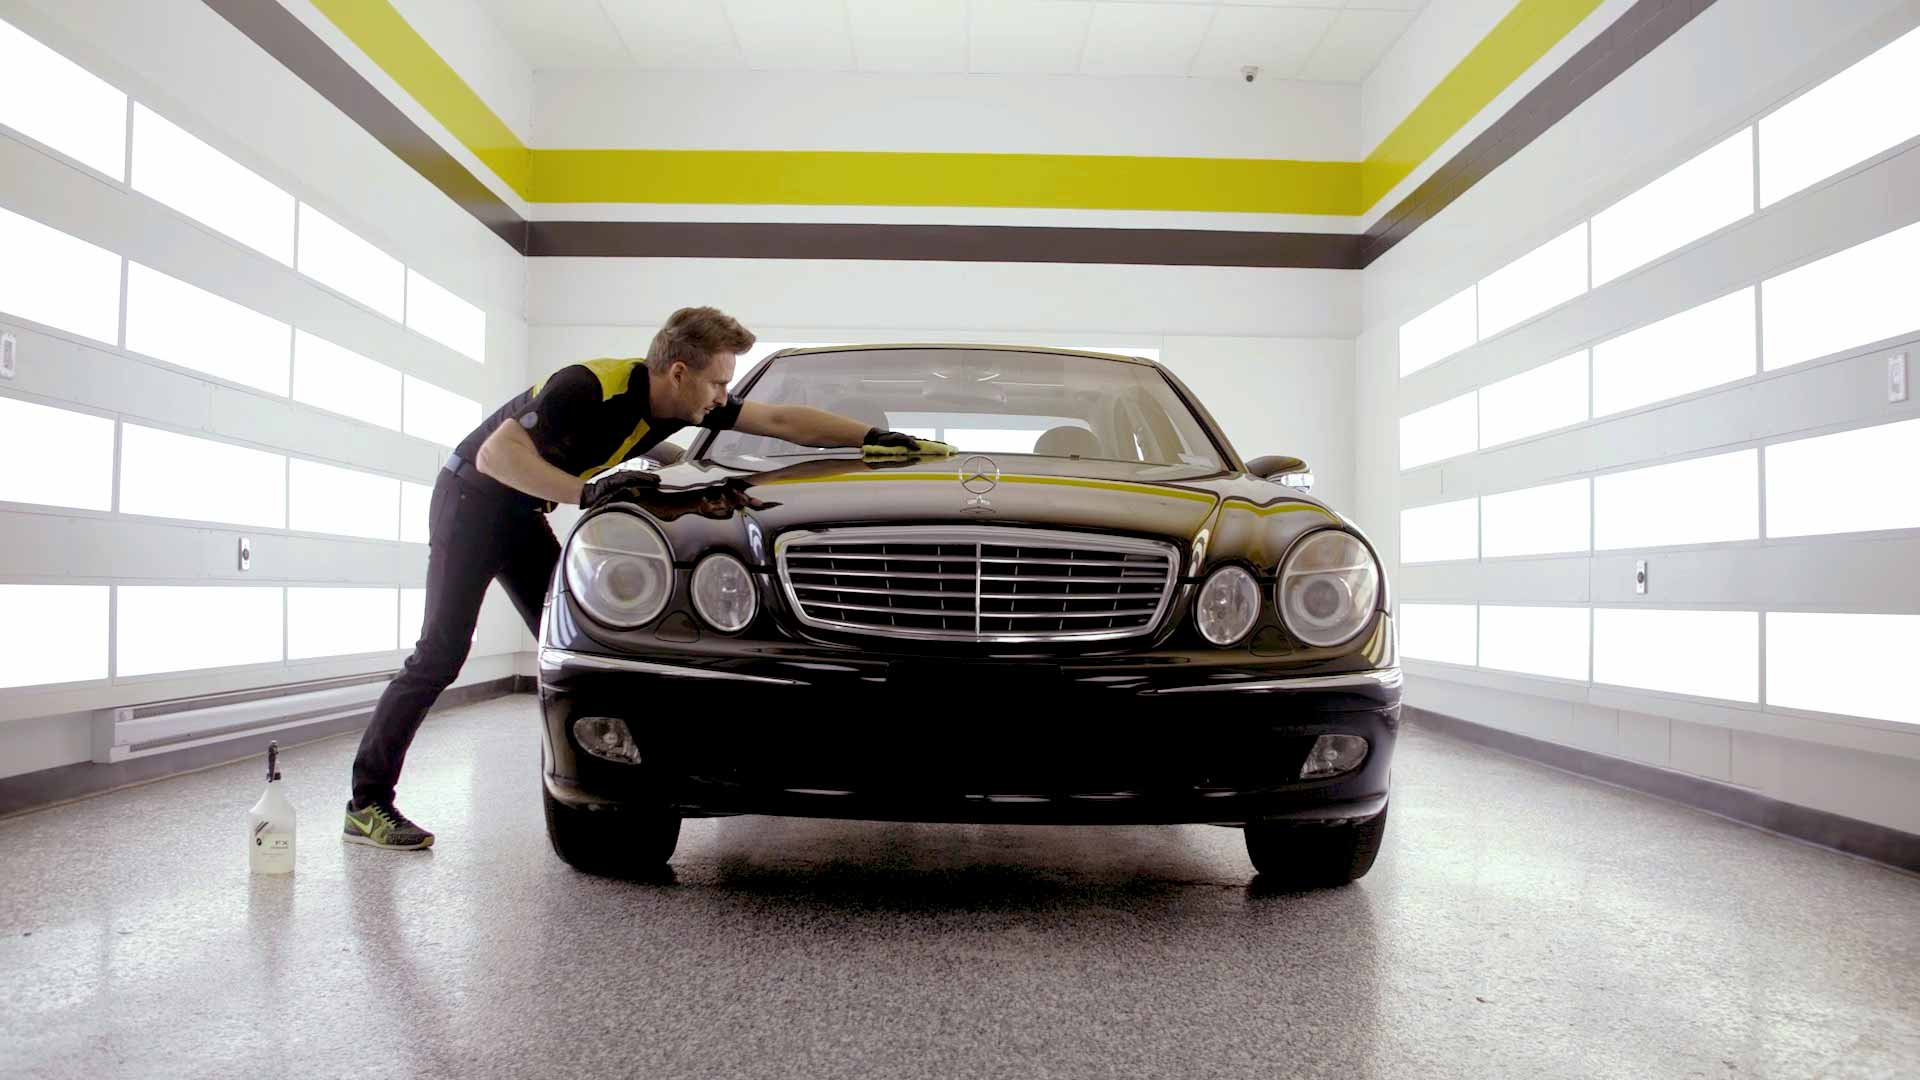 A RestorFX technician finishing the restoration of a shiny, brilliant black Mercedes lit with dramatic wall lights